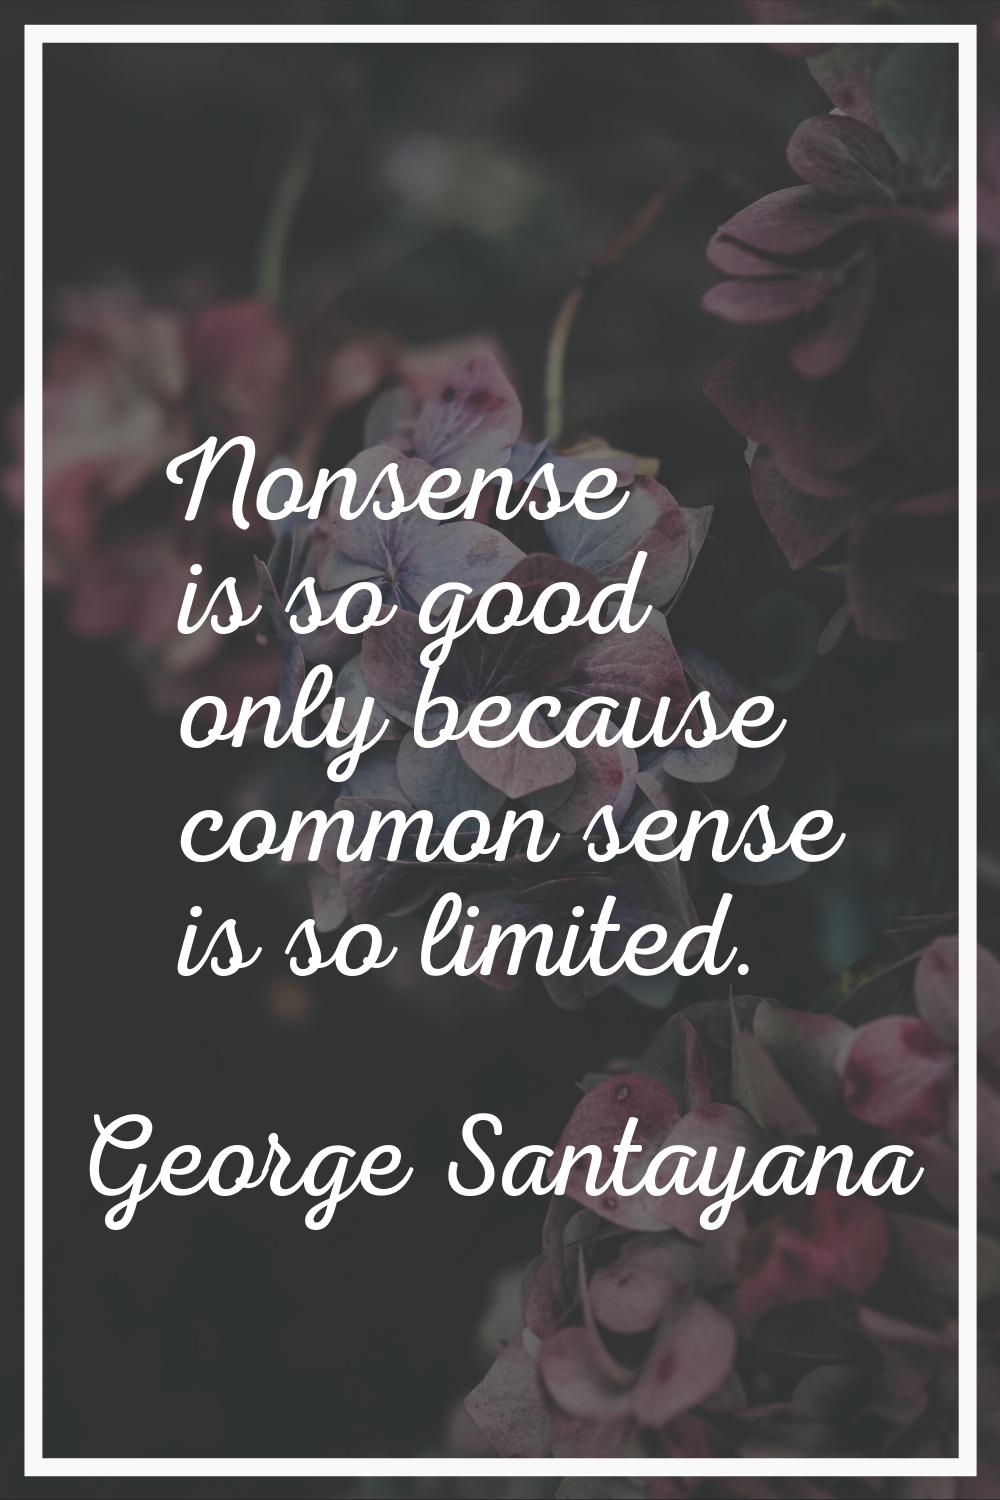 Nonsense is so good only because common sense is so limited.